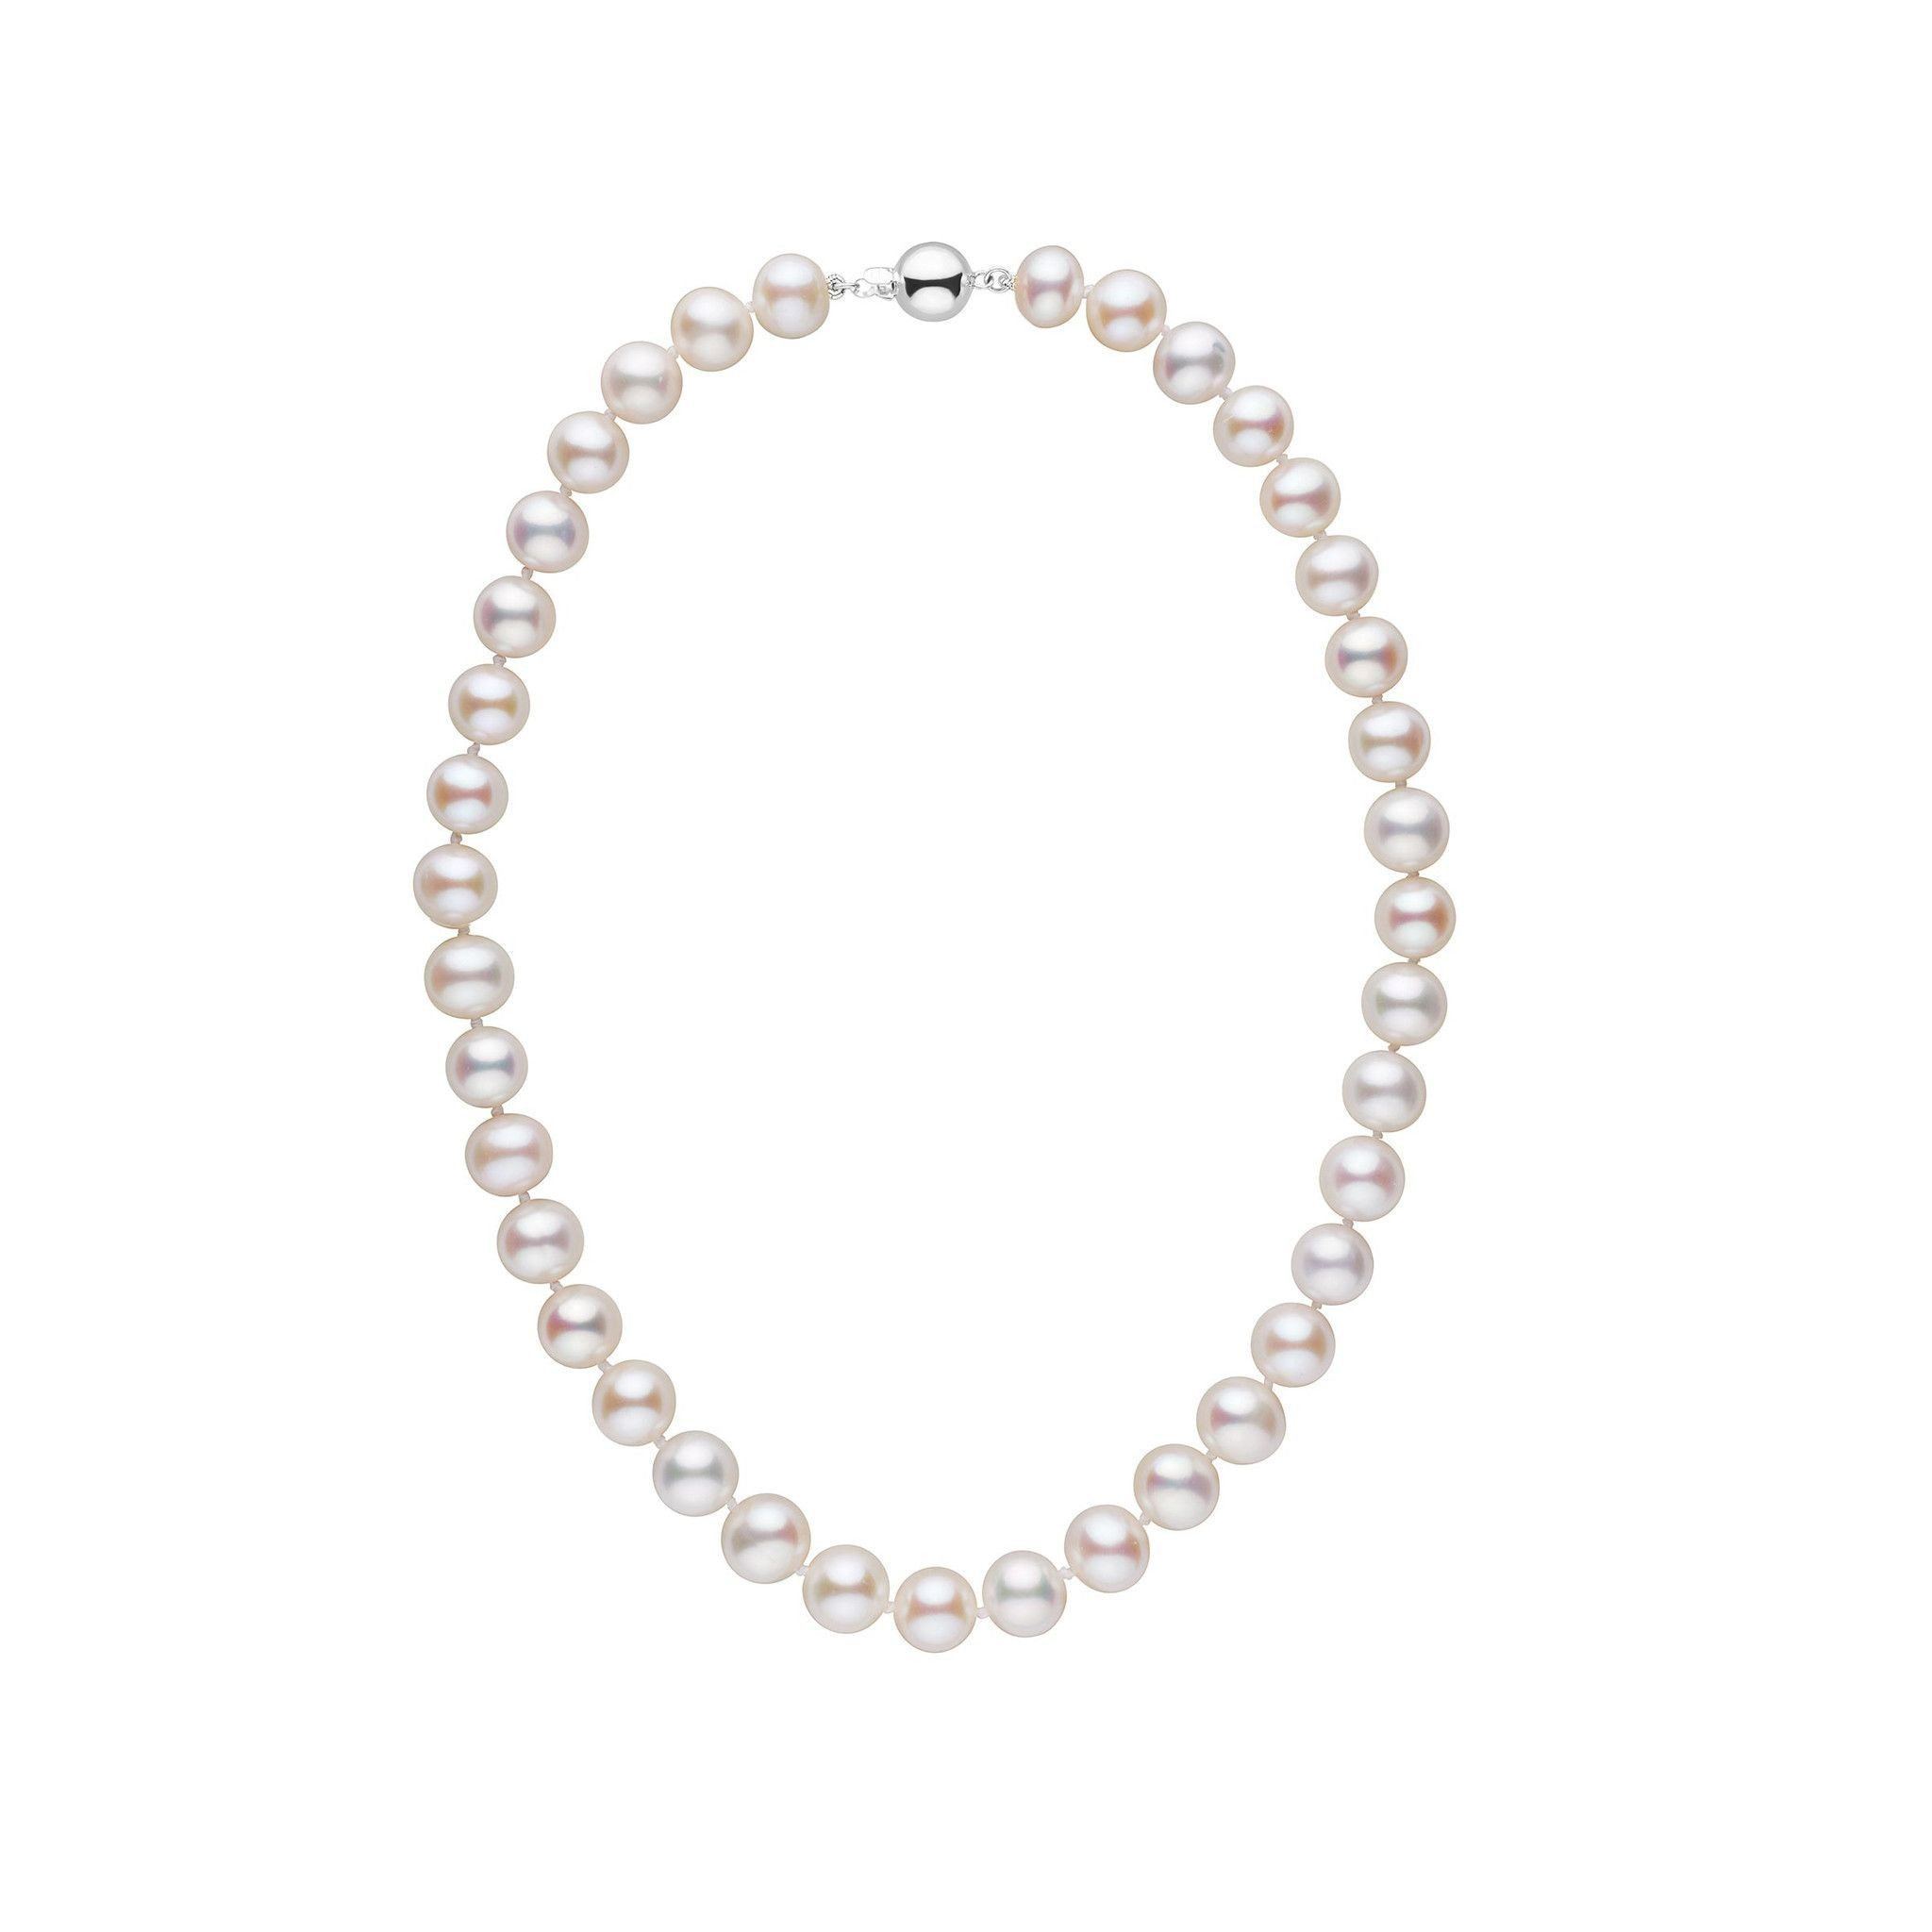 9.5-10.5 mm 16 inch AA+ White Freshwater Pearl Necklace